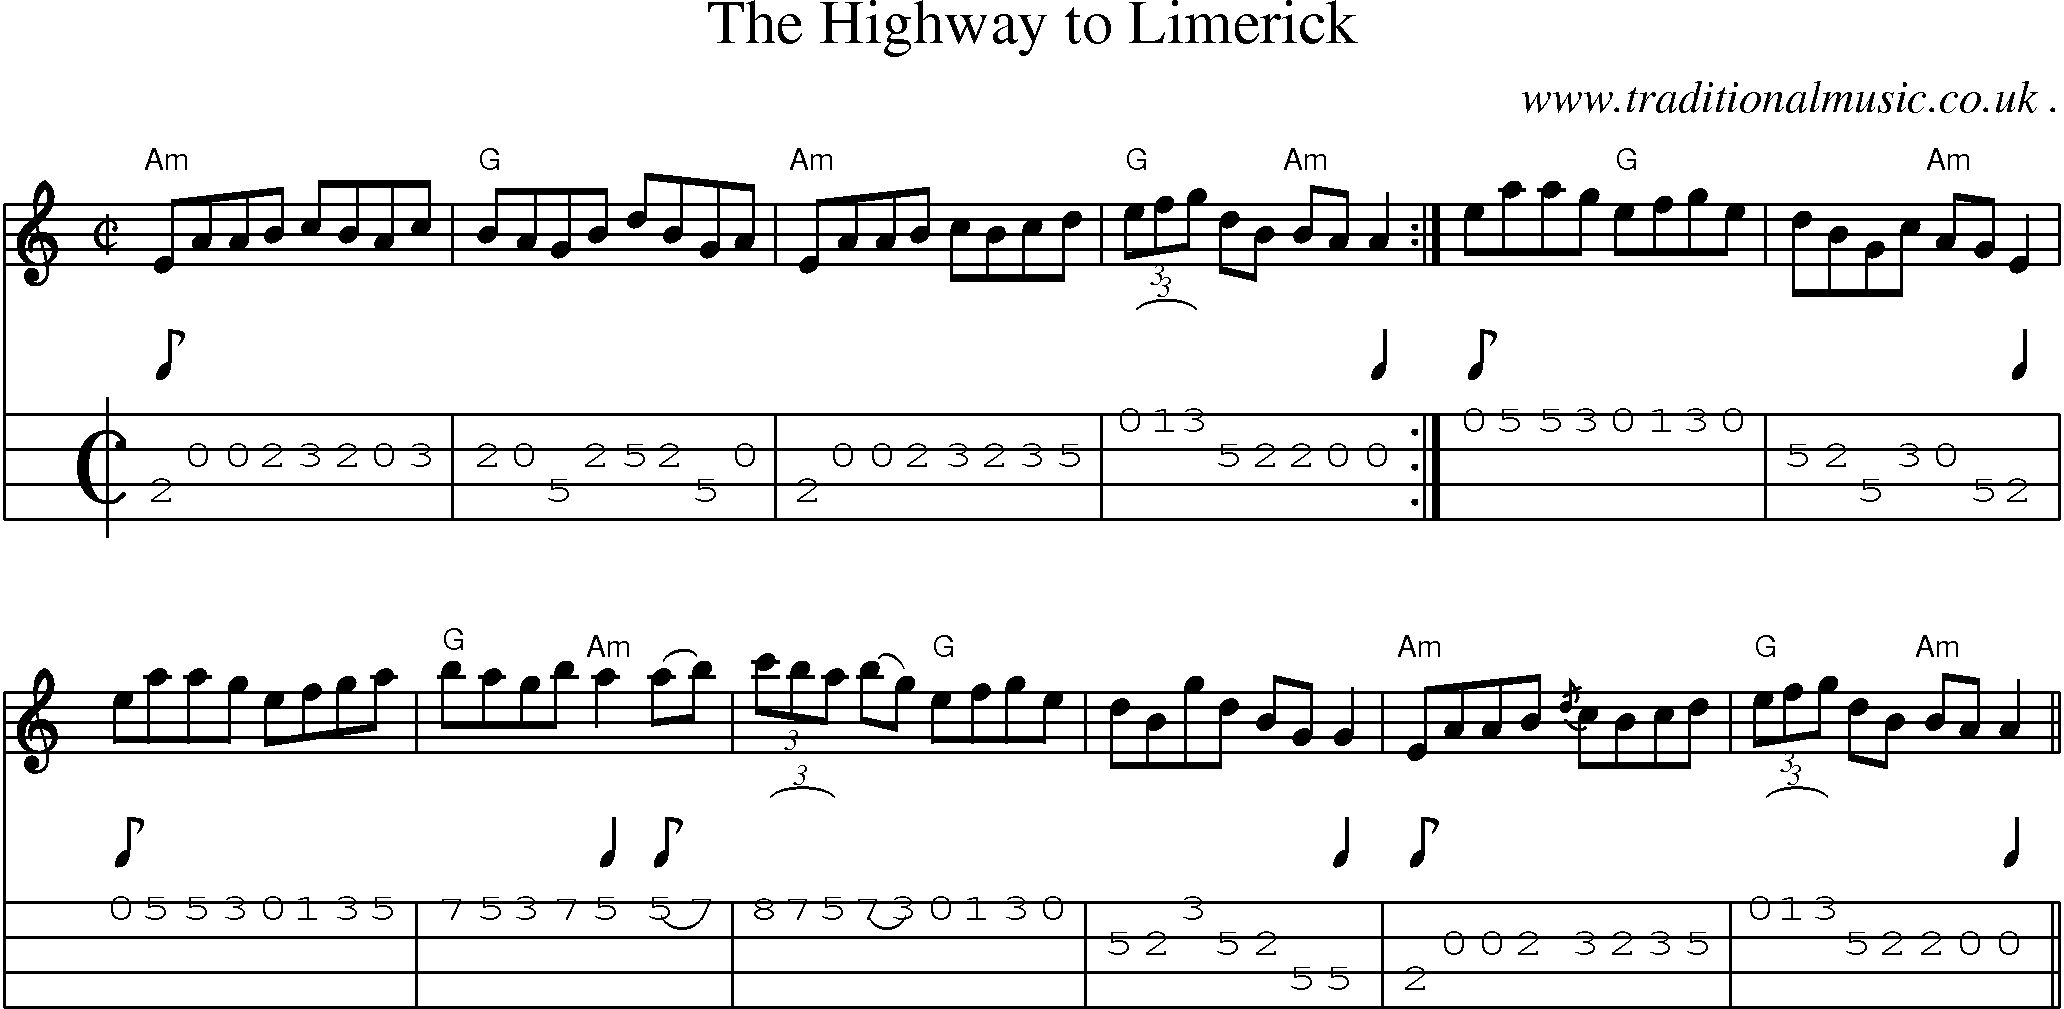 Music Score and Guitar Tabs for The Highway To Limerick